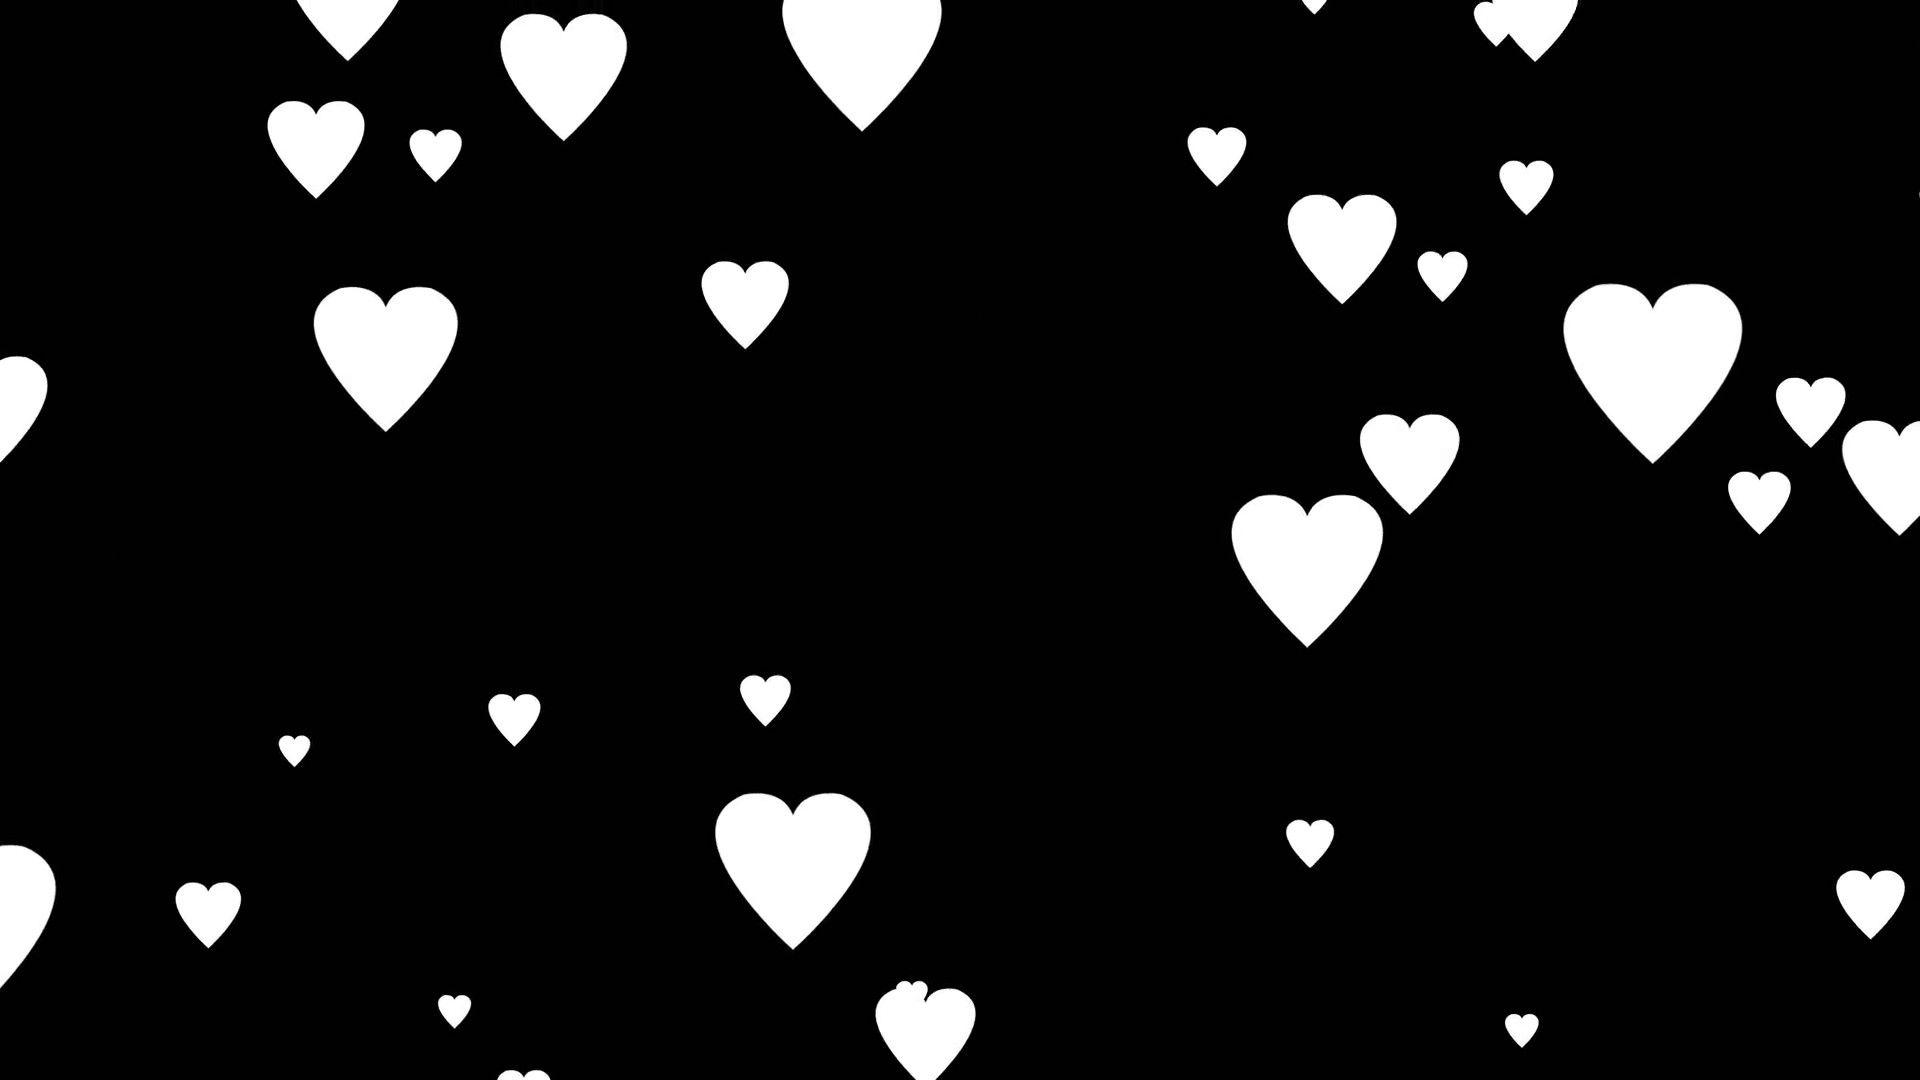 Hearts with Black Background